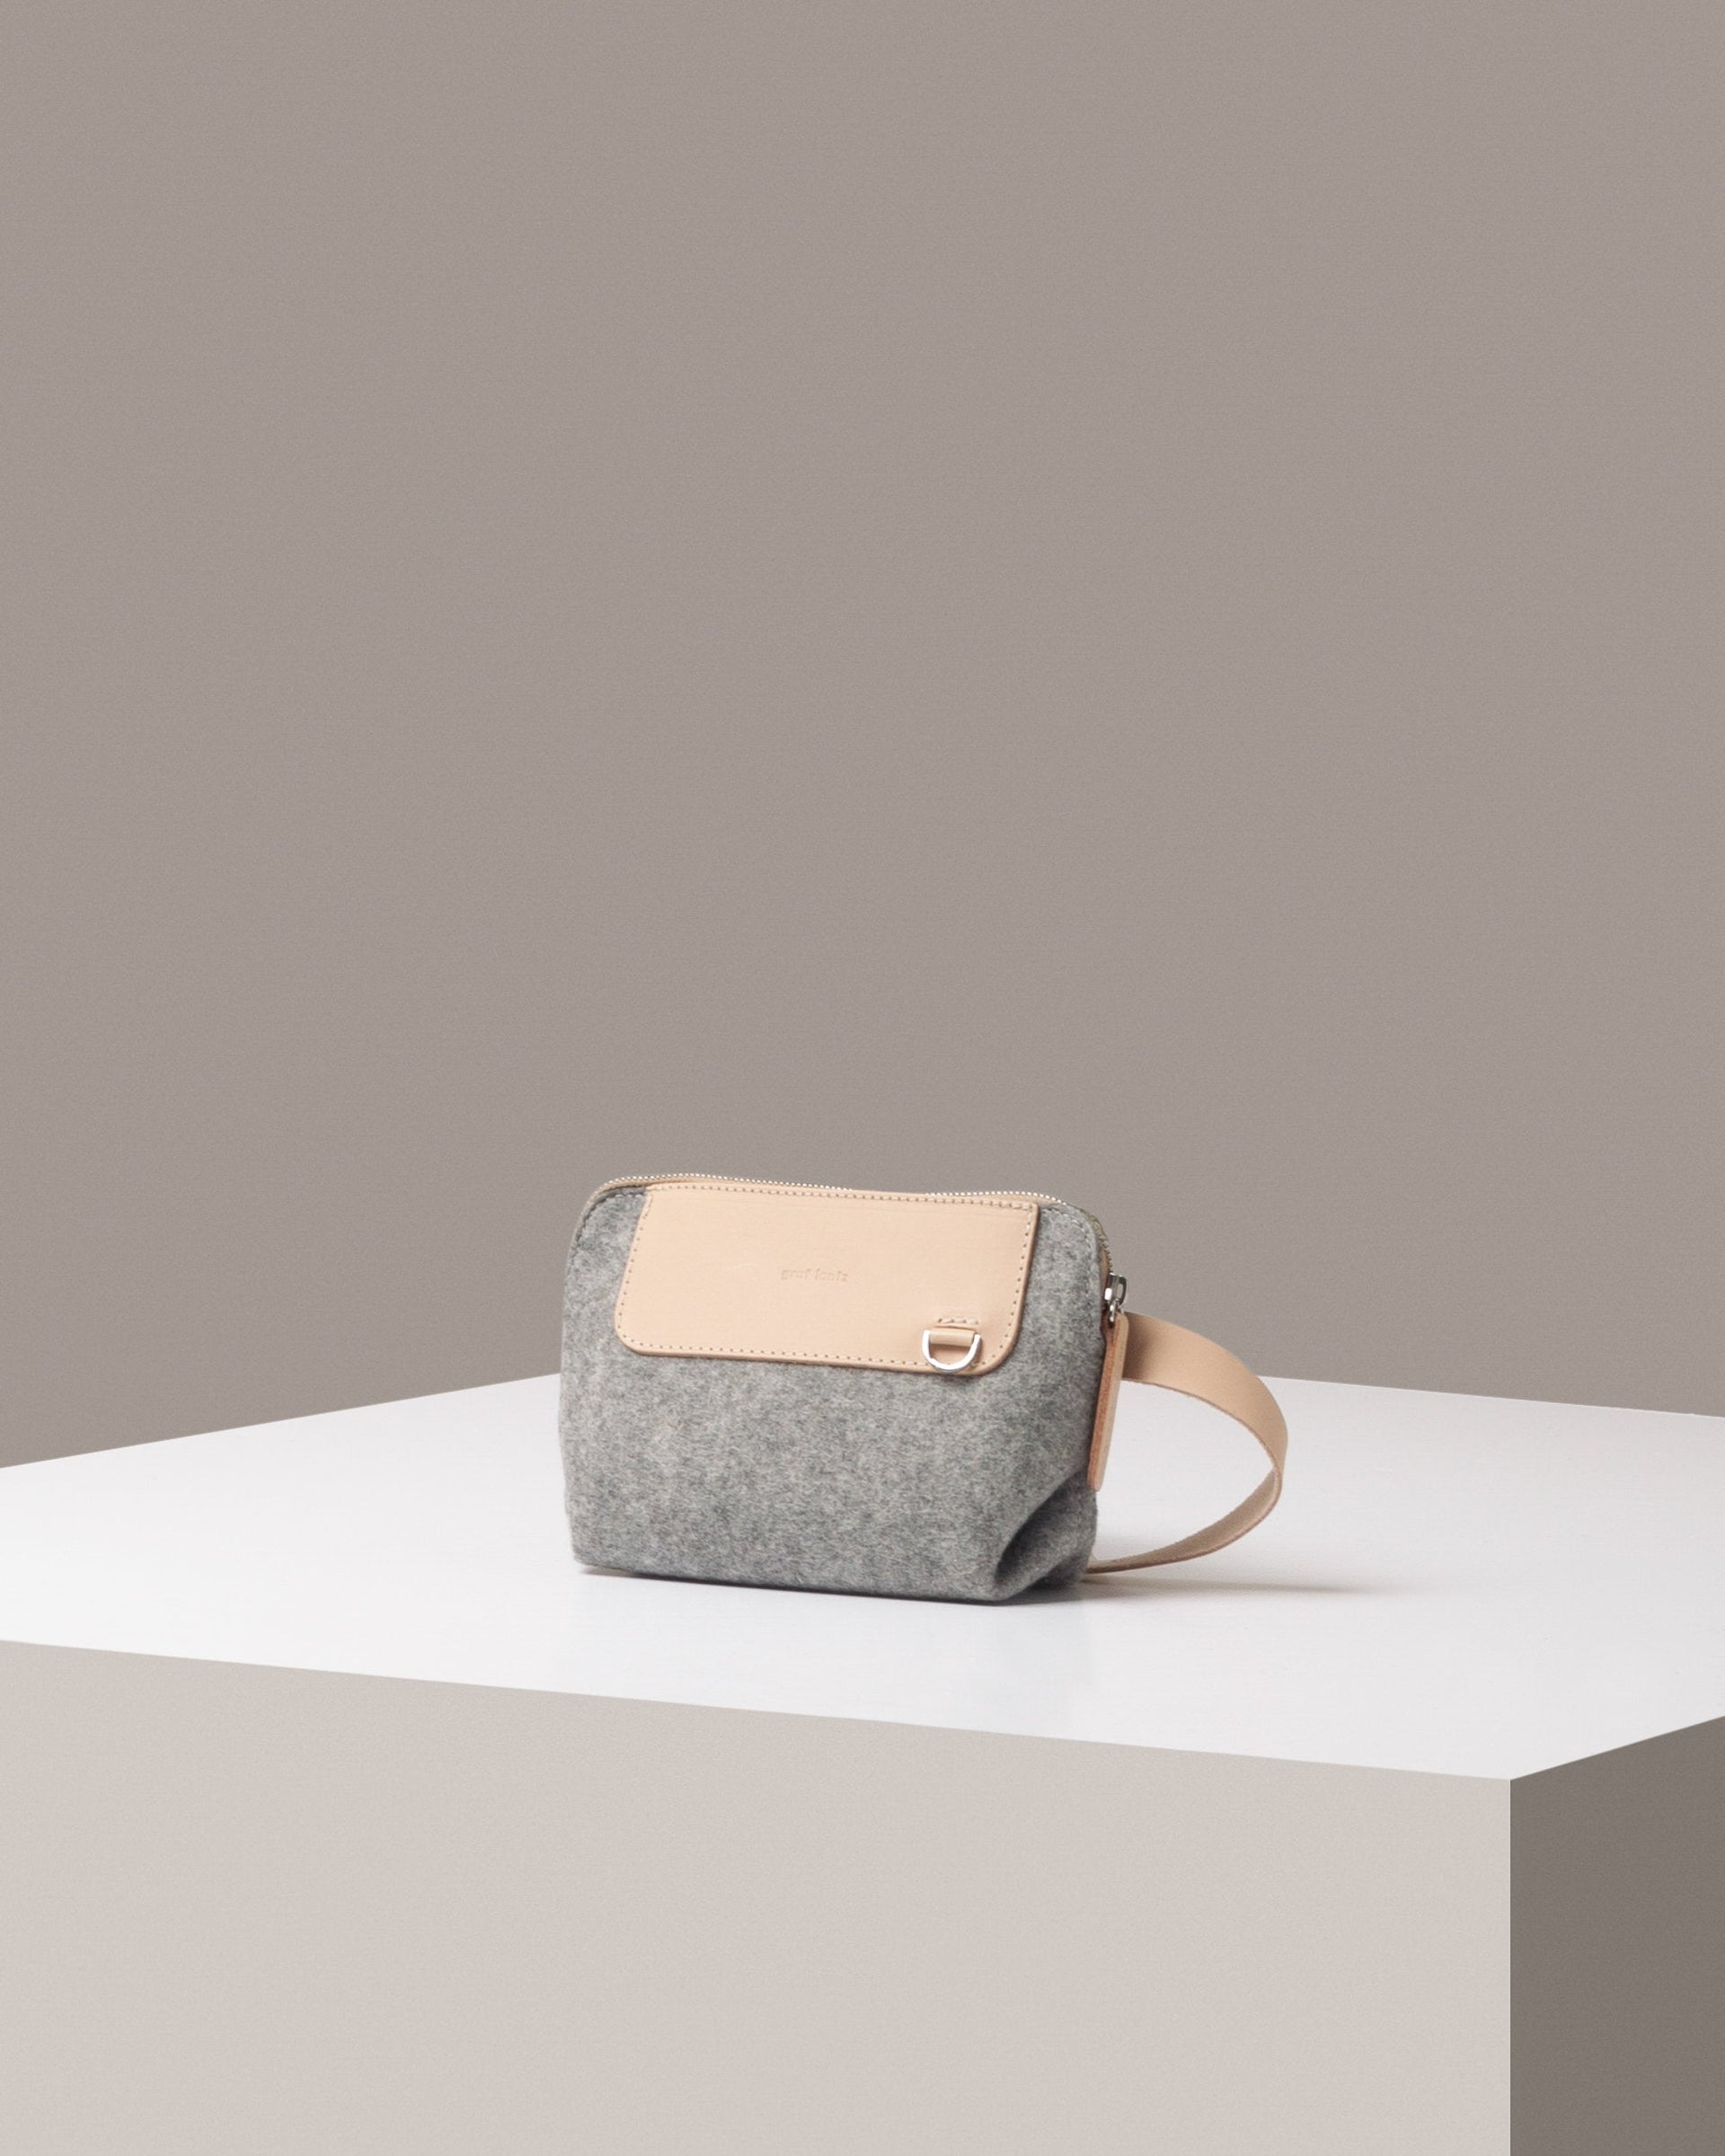 A stylish Bedford Merino Wool Felt Belt Bag in light gray with beige leather accents, displayed in a three-quarter view on a white base